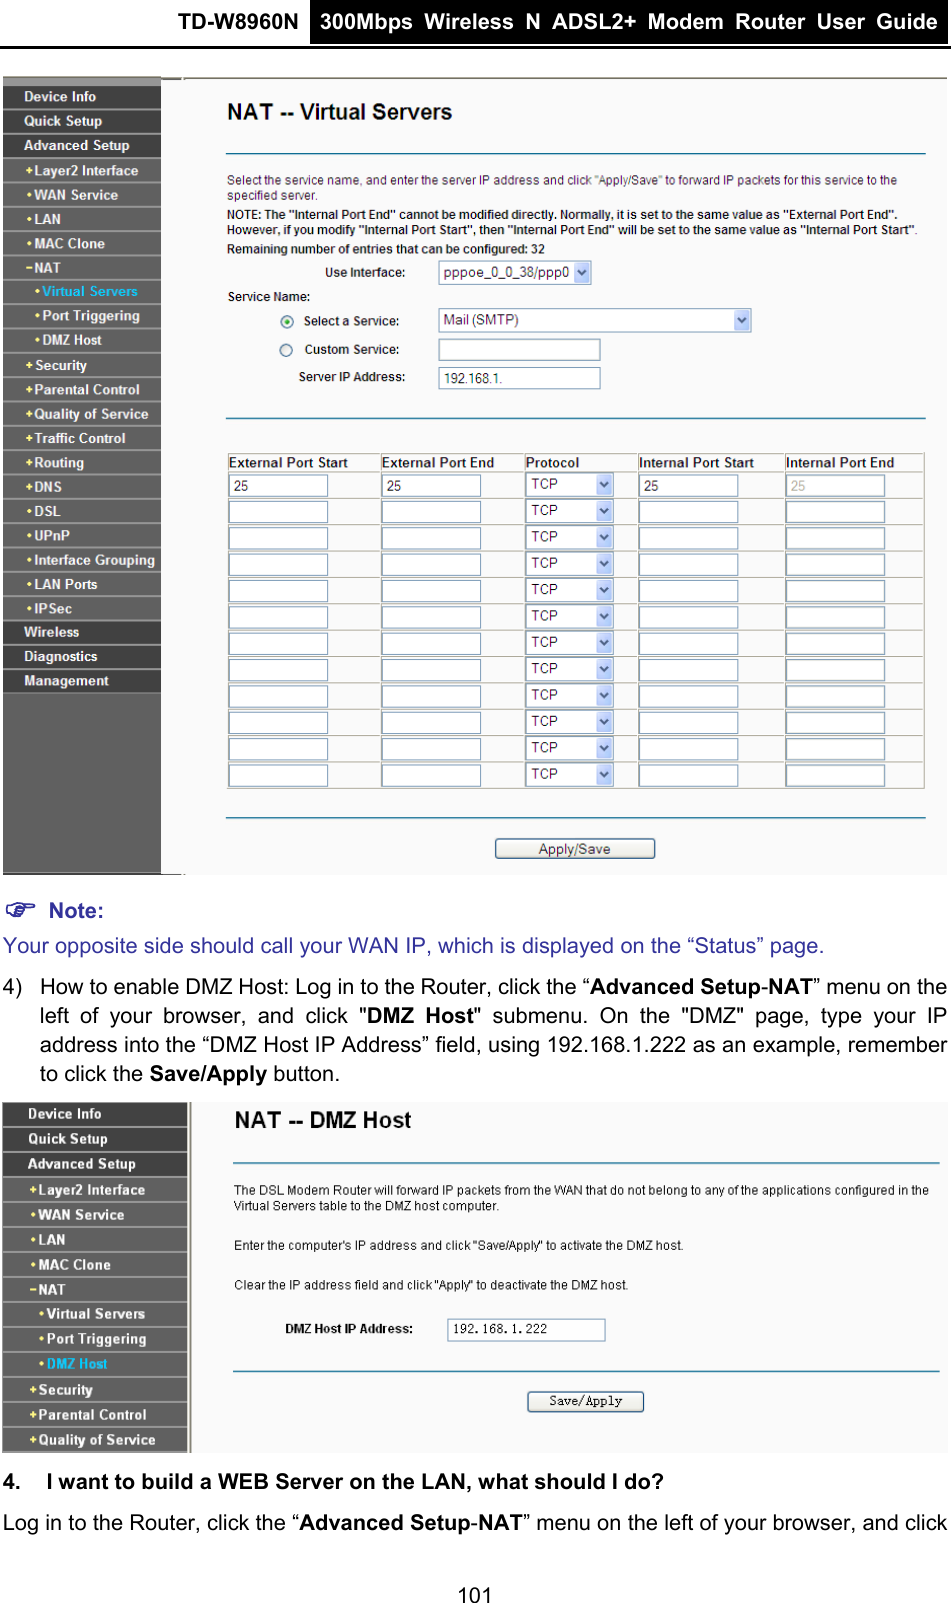 TD-W8960N  300Mbps Wireless N ADSL2+ Modem Router User Guide   ) Note: Your opposite side should call your WAN IP, which is displayed on the “Status” page. 4)  How to enable DMZ Host: Log in to the Router, click the “Advanced Setup-NAT” menu on the left of your browser, and click &quot;DMZ Host&quot; submenu. On the &quot;DMZ&quot; page, type your IP address into the “DMZ Host IP Address” field, using 192.168.1.222 as an example, remember to click the Save/Apply button.    4.  I want to build a WEB Server on the LAN, what should I do? Log in to the Router, click the “Advanced Setup-NAT” menu on the left of your browser, and click 101 